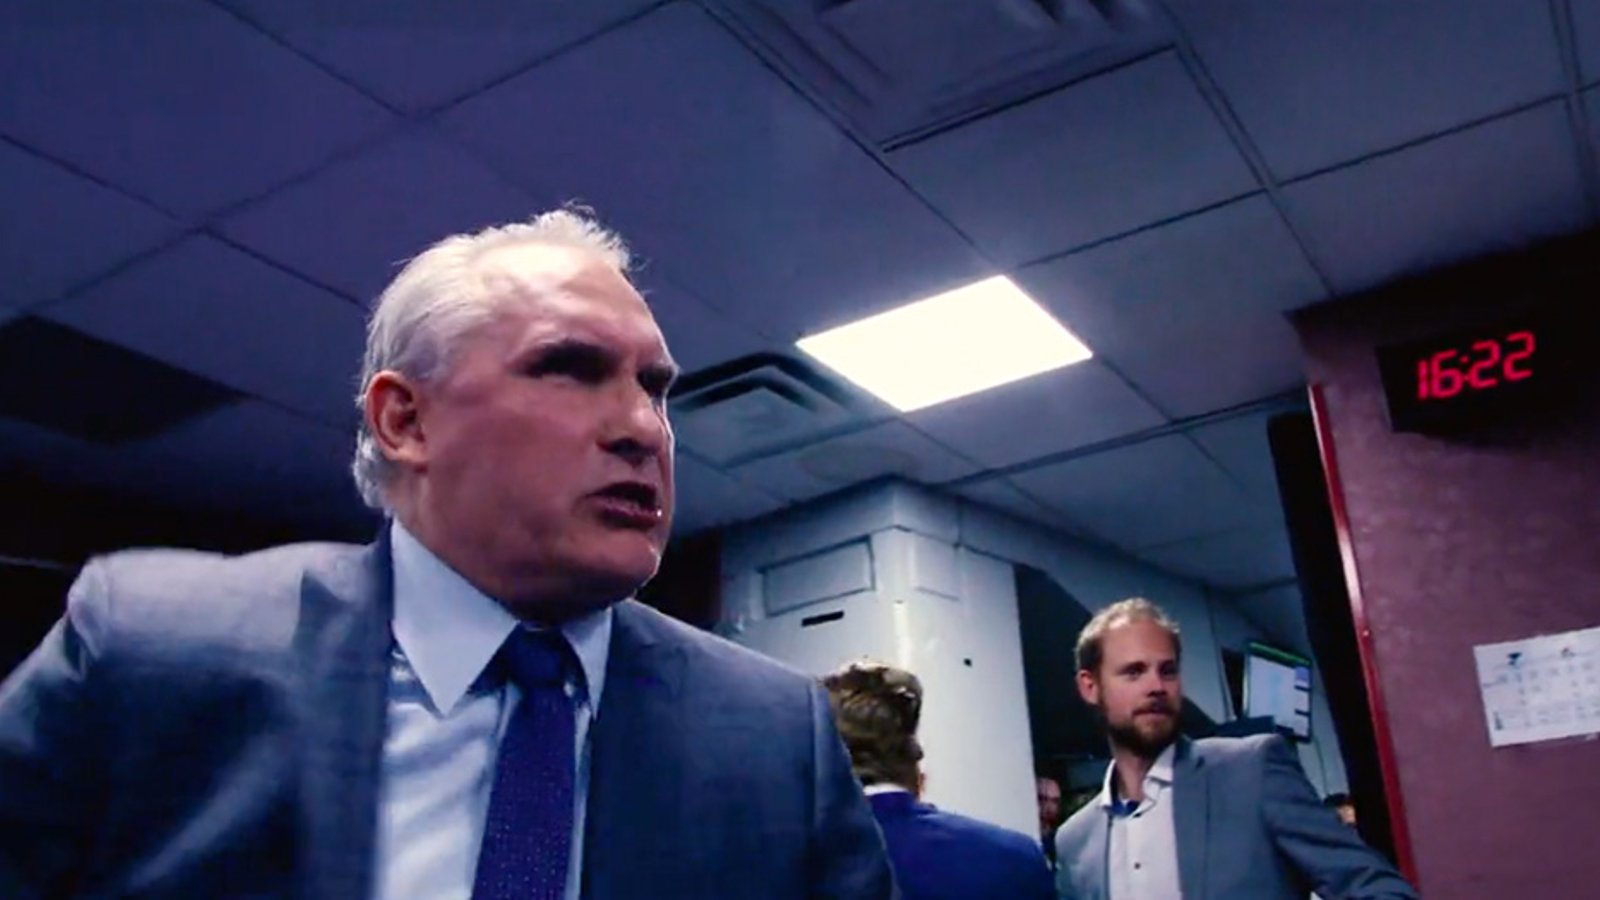 VIDEO: St. Louis Blues coach Craig Berube fired up in dressing room!